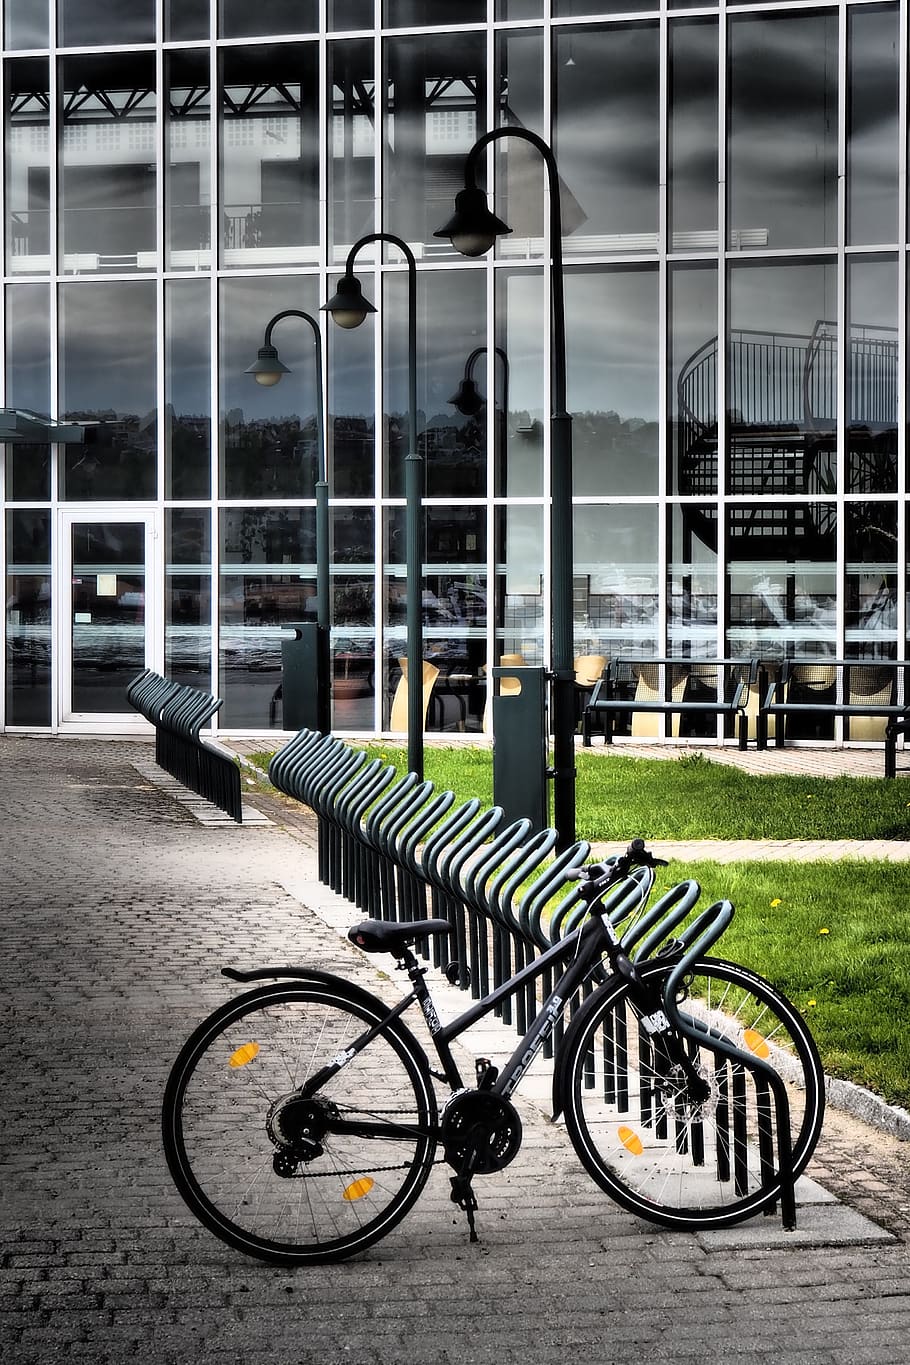 bike, bicycle, city, transport, cycling, norway, harstad, transportation, day, architecture